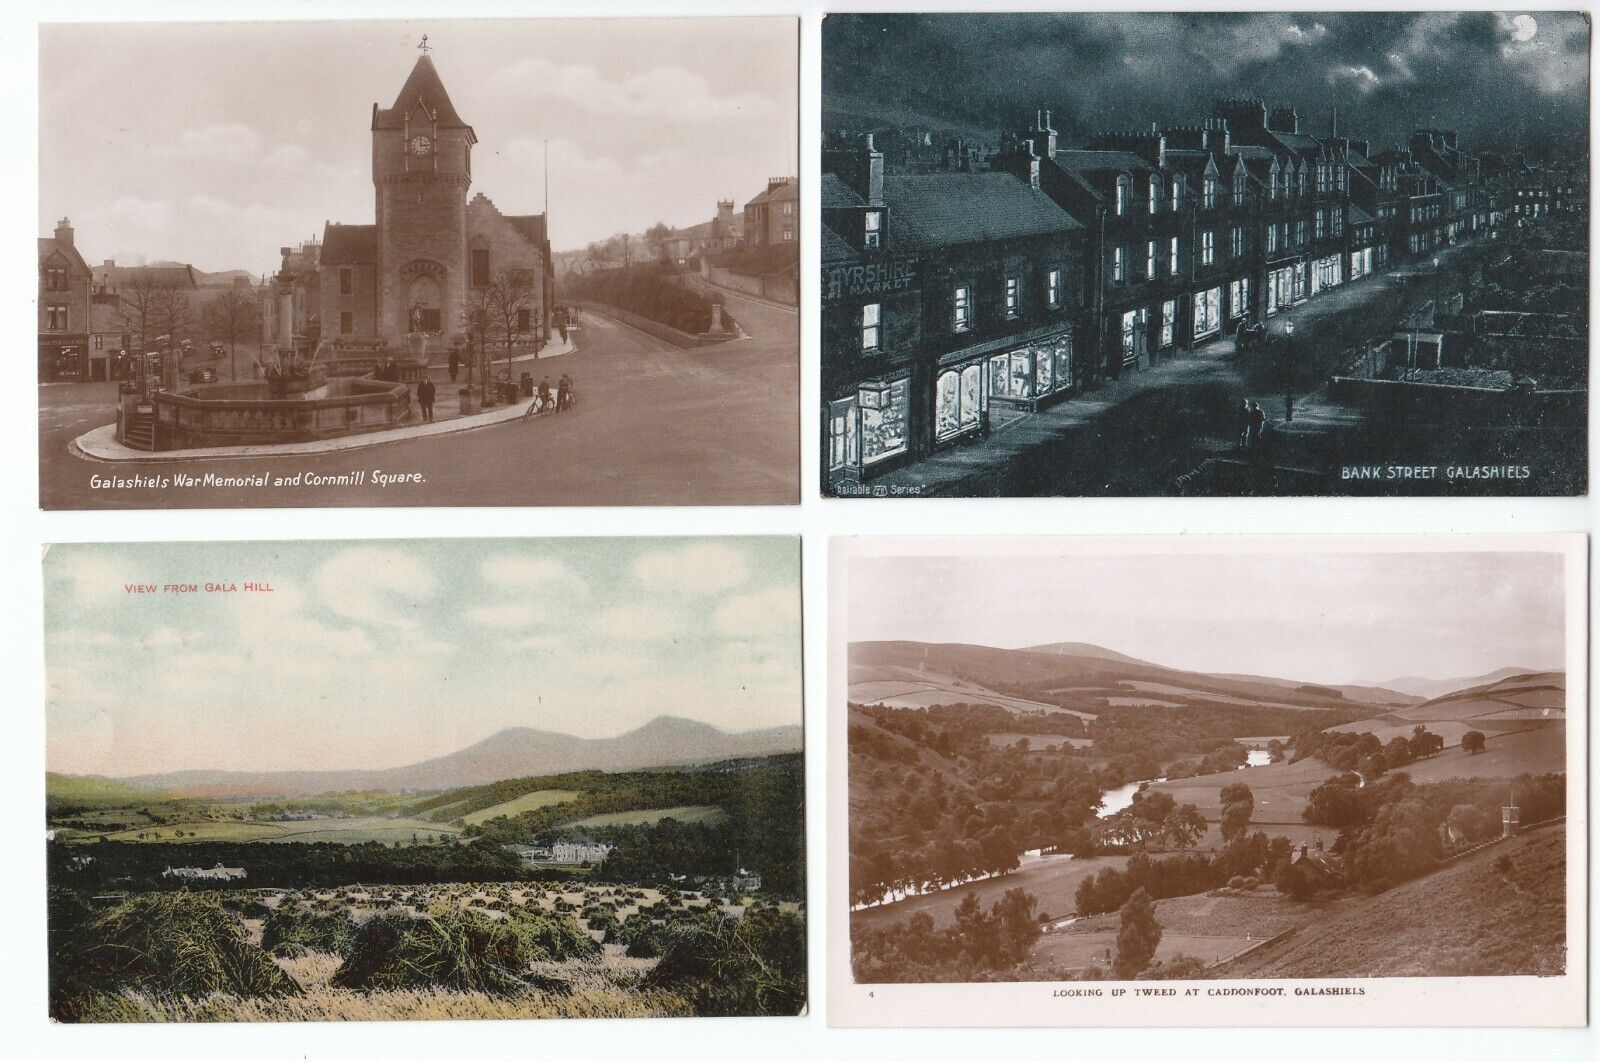 House Clearance - 10 Galashiels Selkirk Selkirkshire Scotland Old Services All Cards Shown (P5)